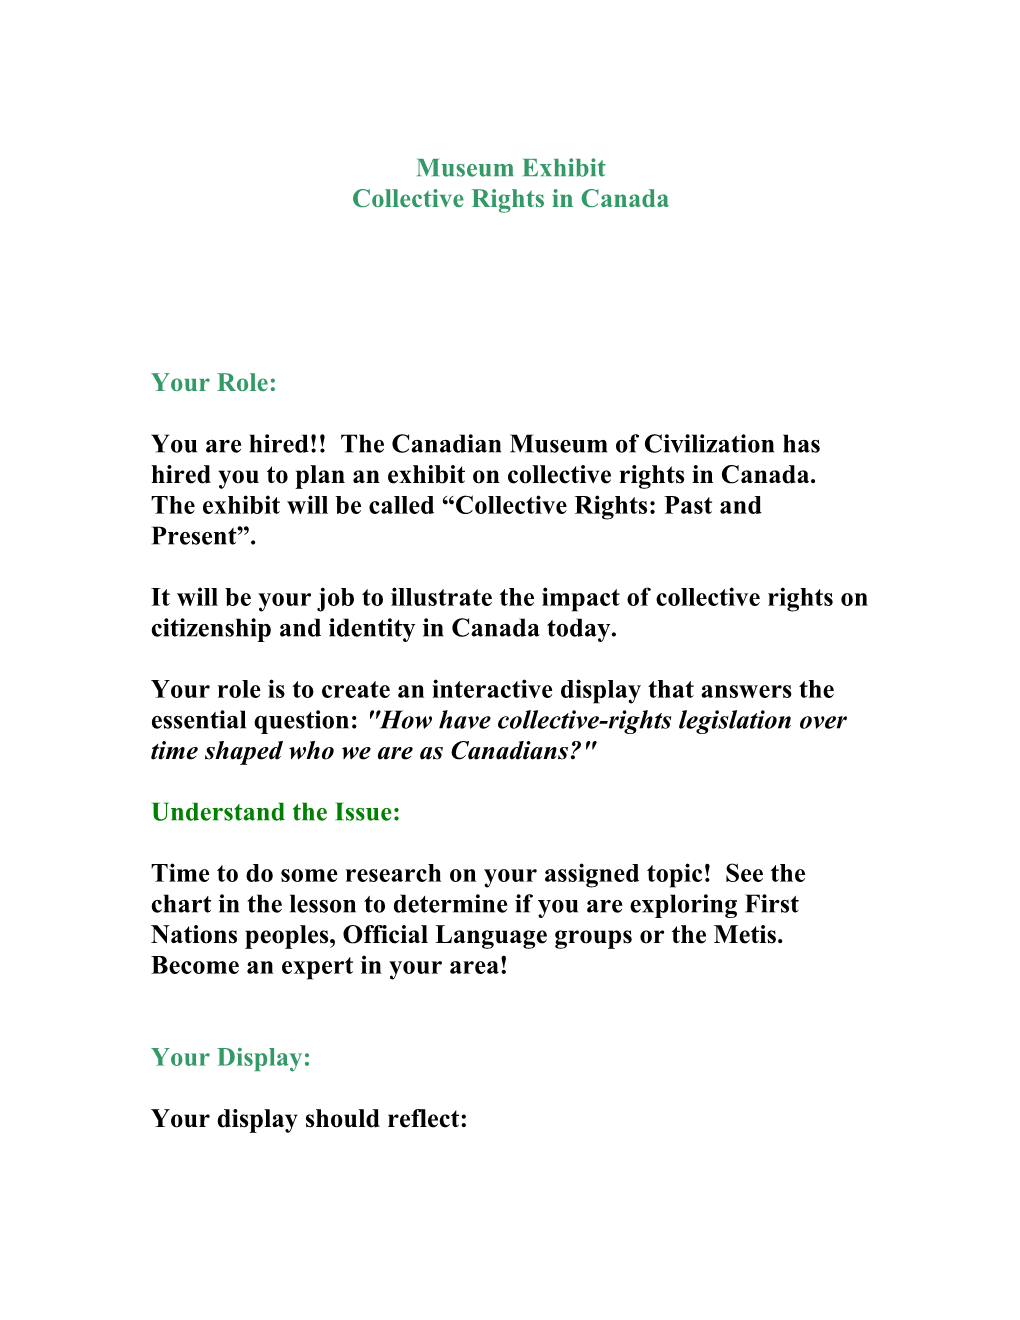 Museum Exhibit Collective Rights in Canada